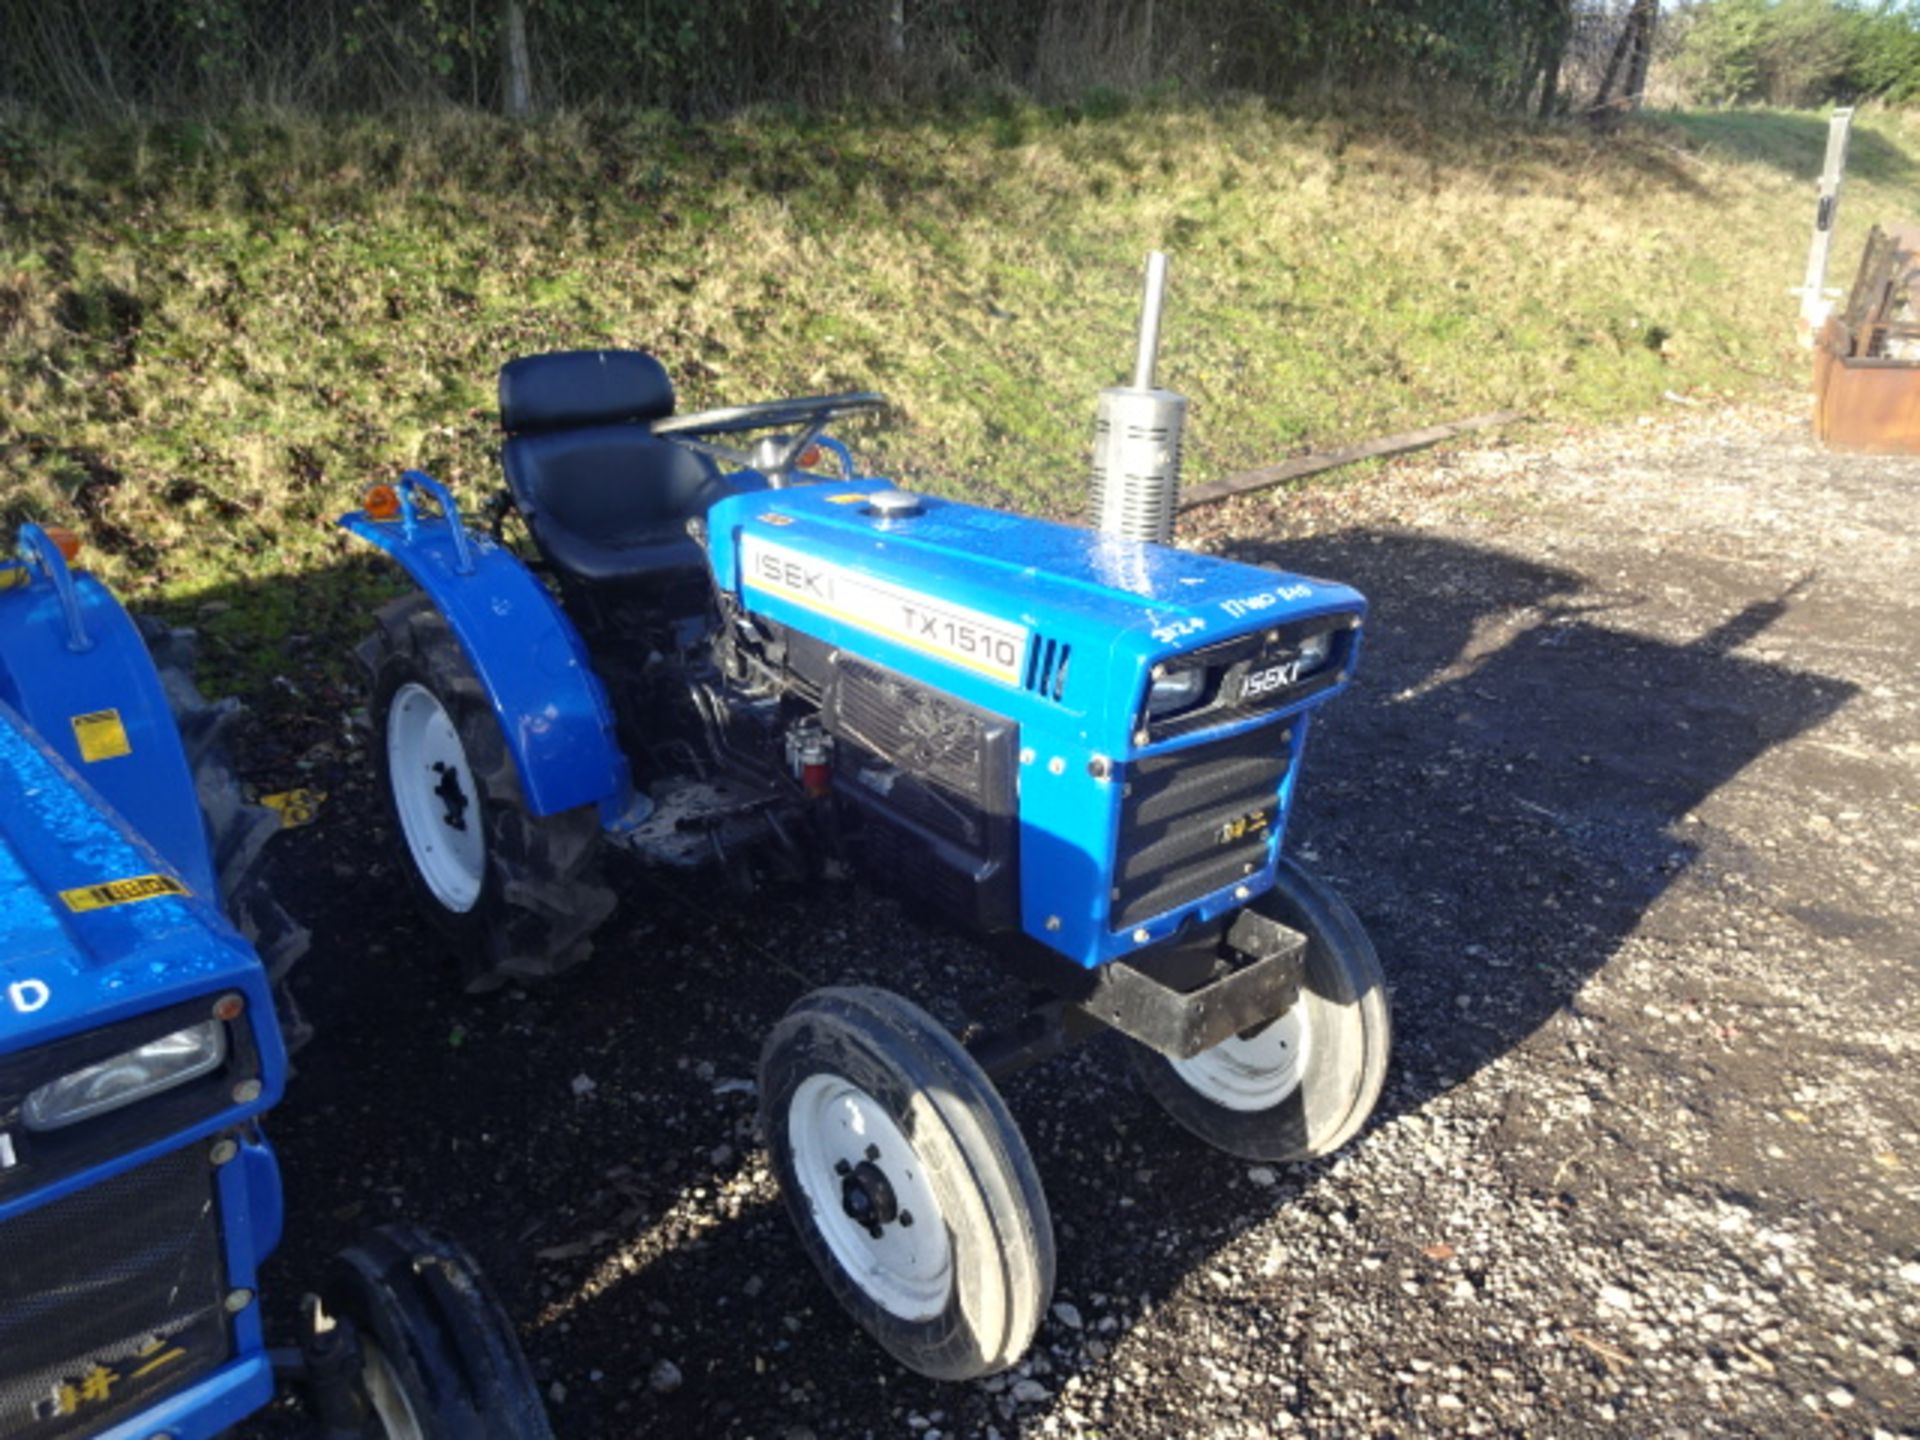 ISEKI TX1510 3-cylinder 2wd compact tractor, 535 hours c/w 3-point linkage & pto (R&D)